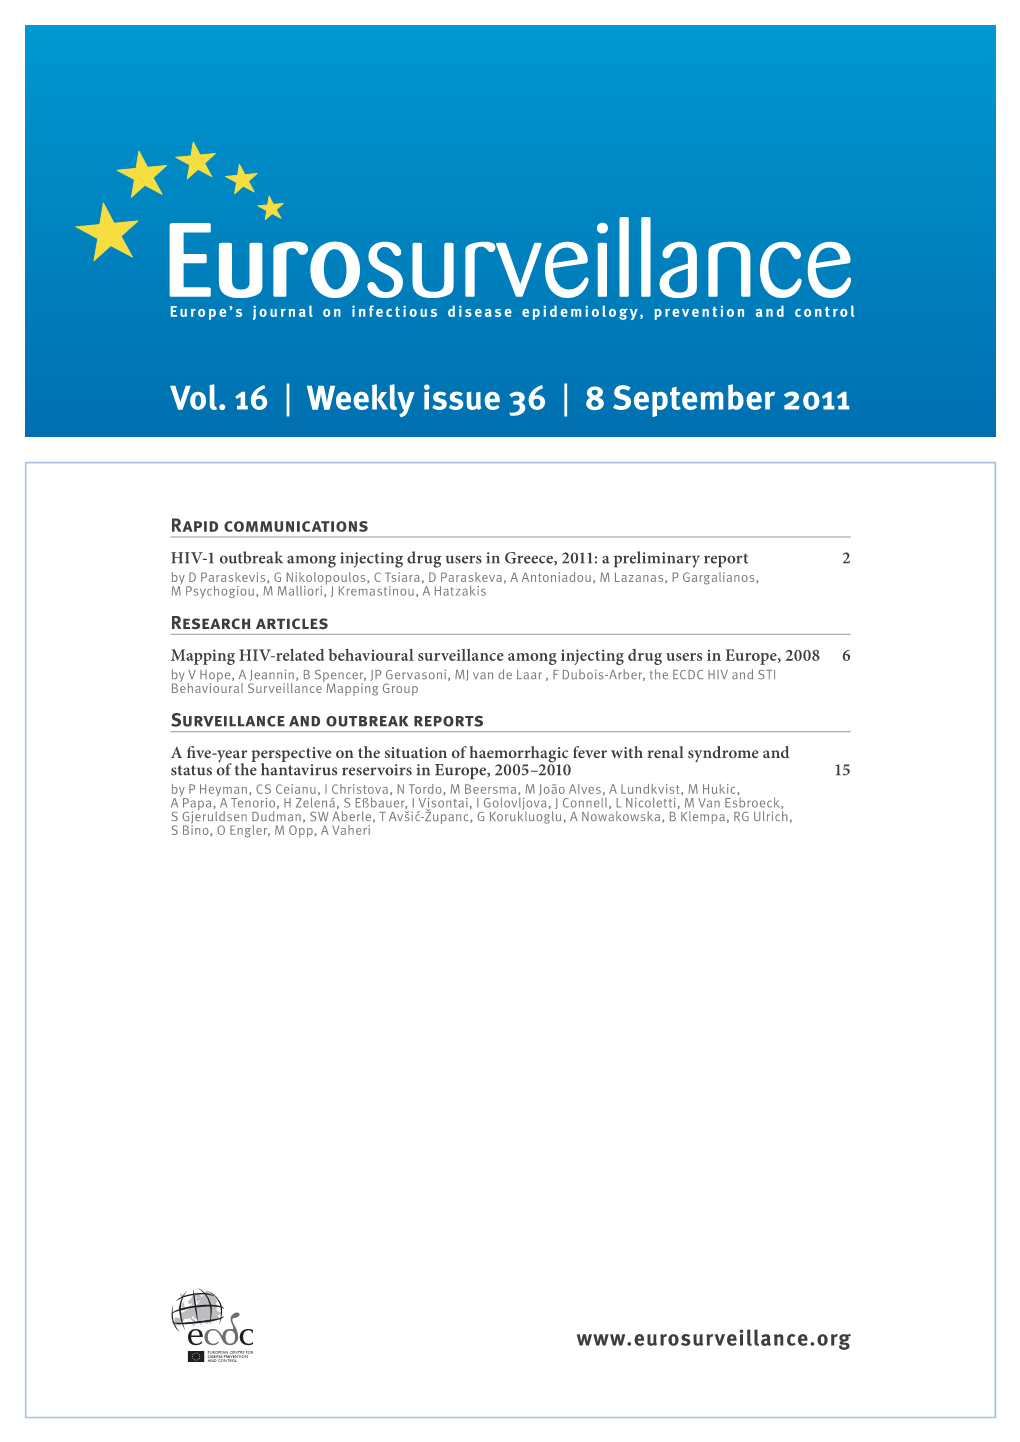 Vol. 16 | Weekly Issue 36 | 8 September 2011